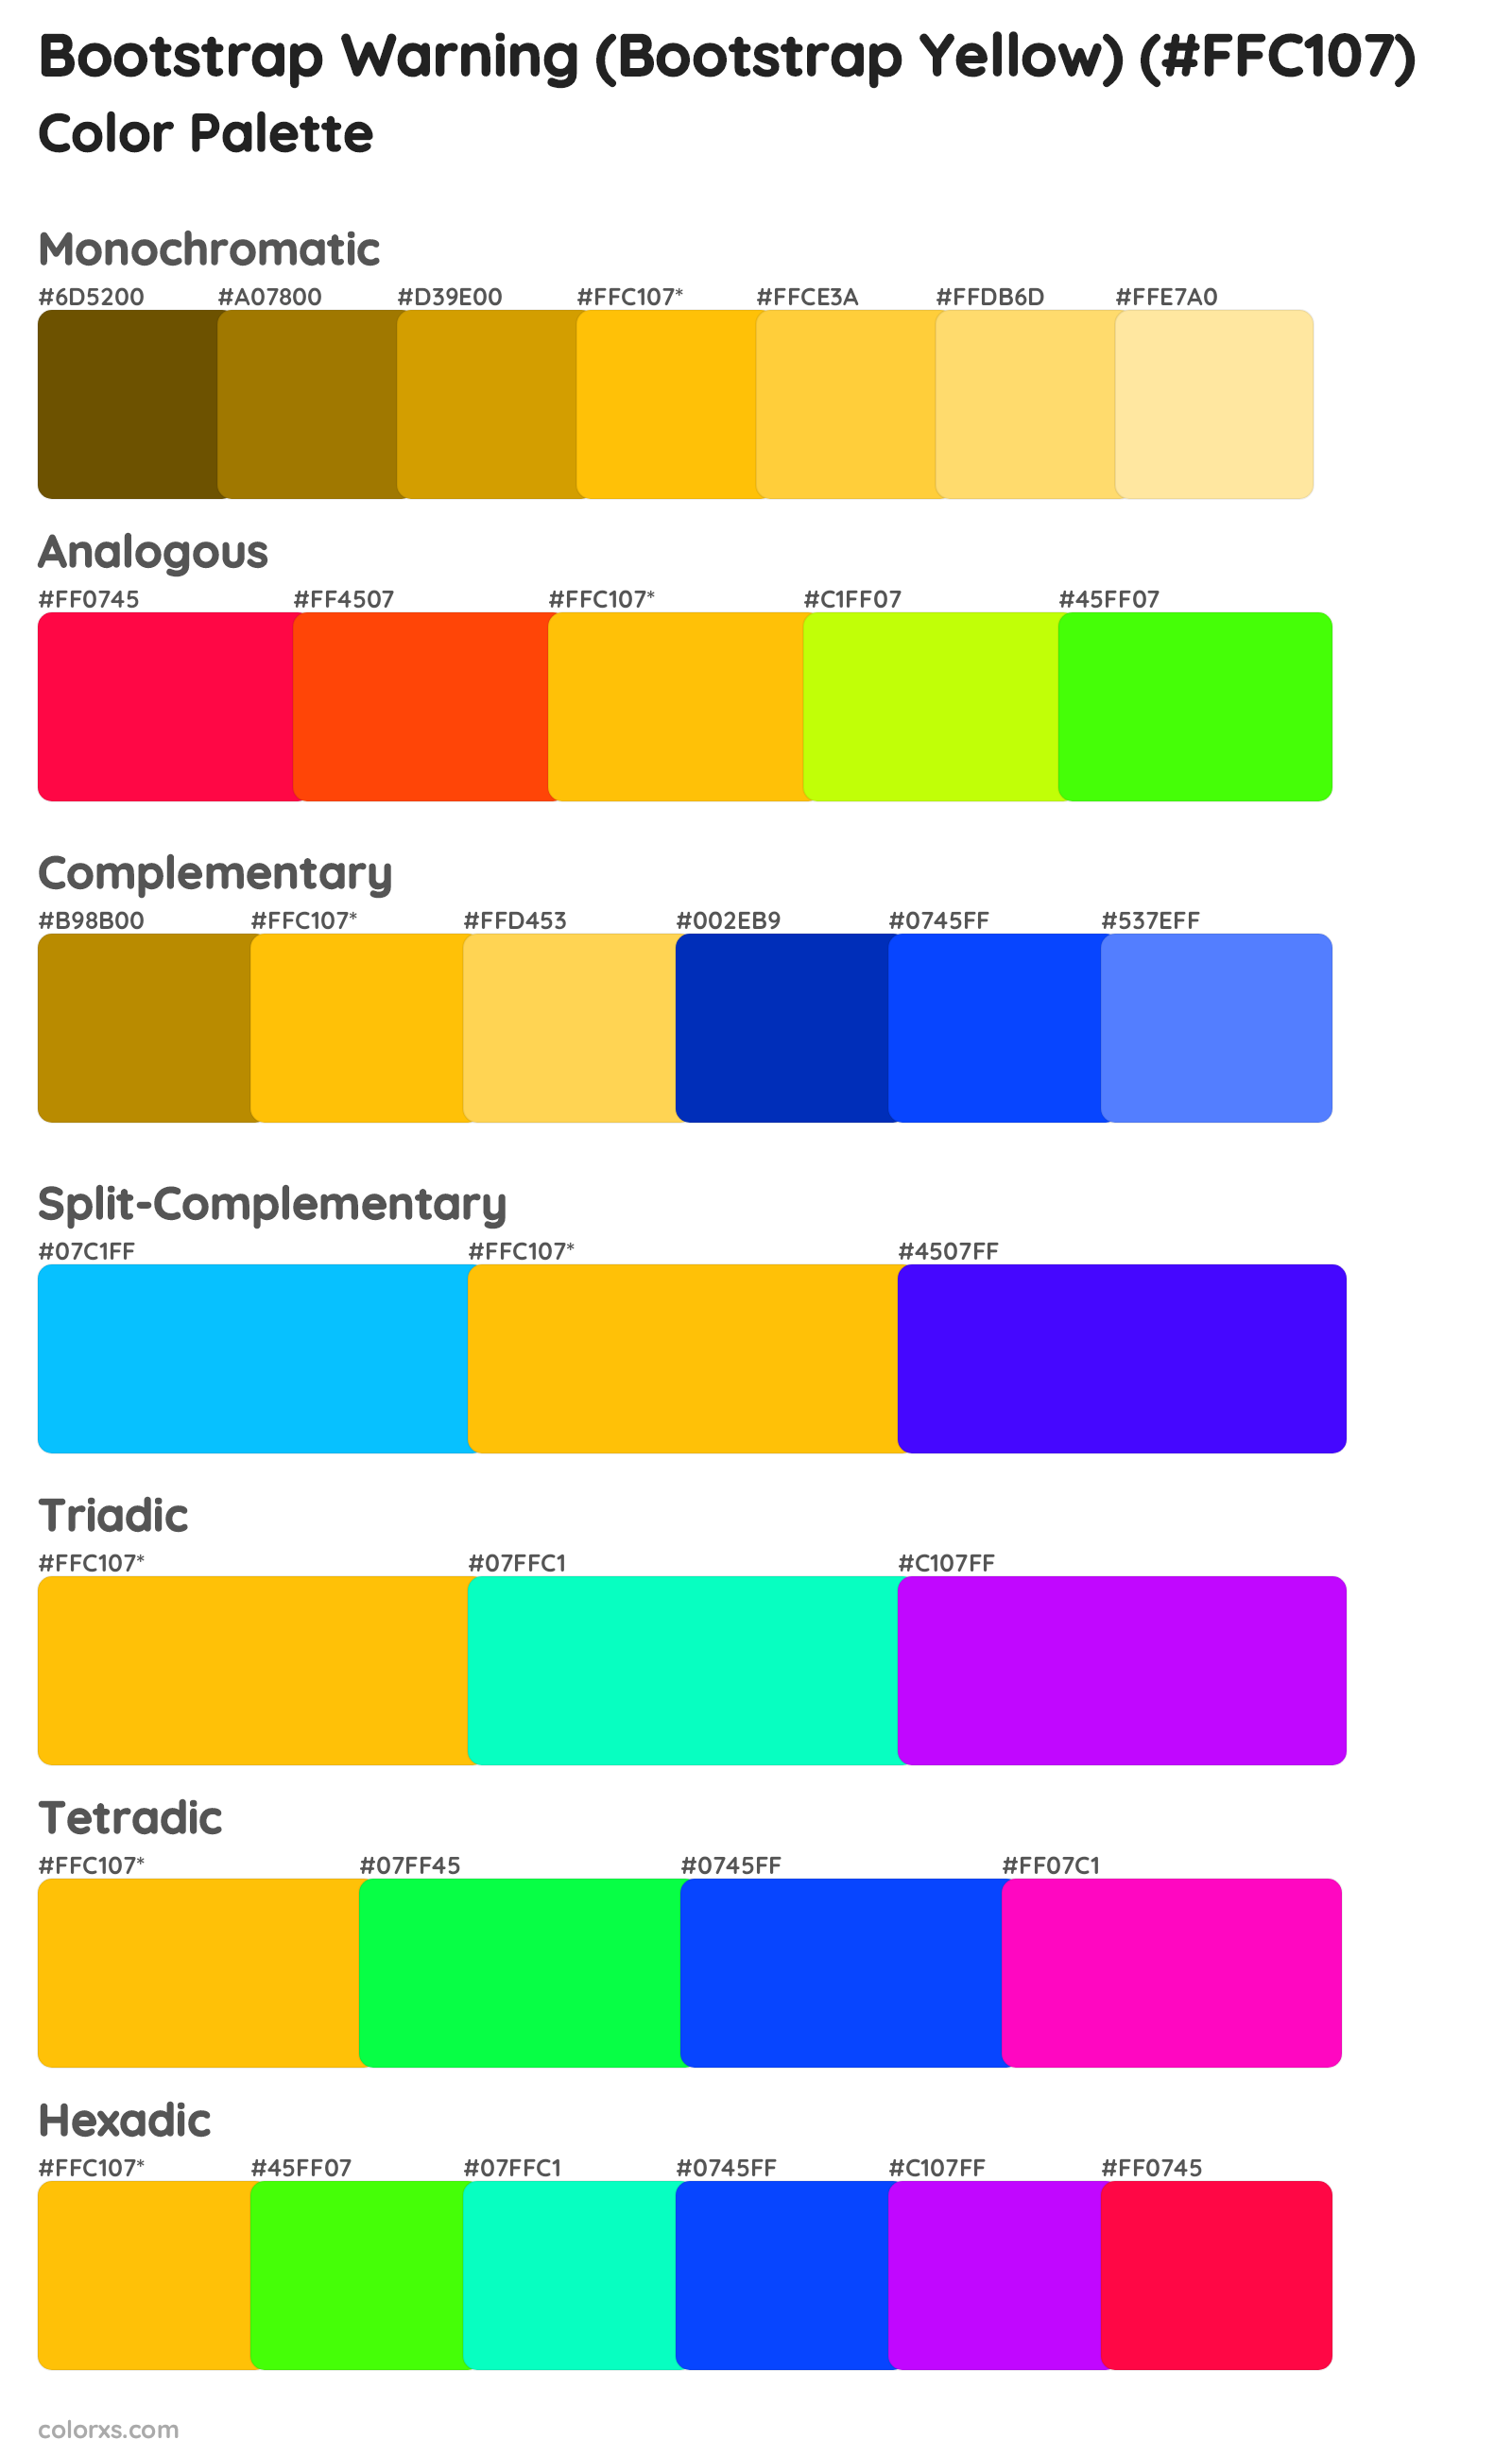 Bootstrap Warning (Bootstrap Yellow) Color Scheme Palettes